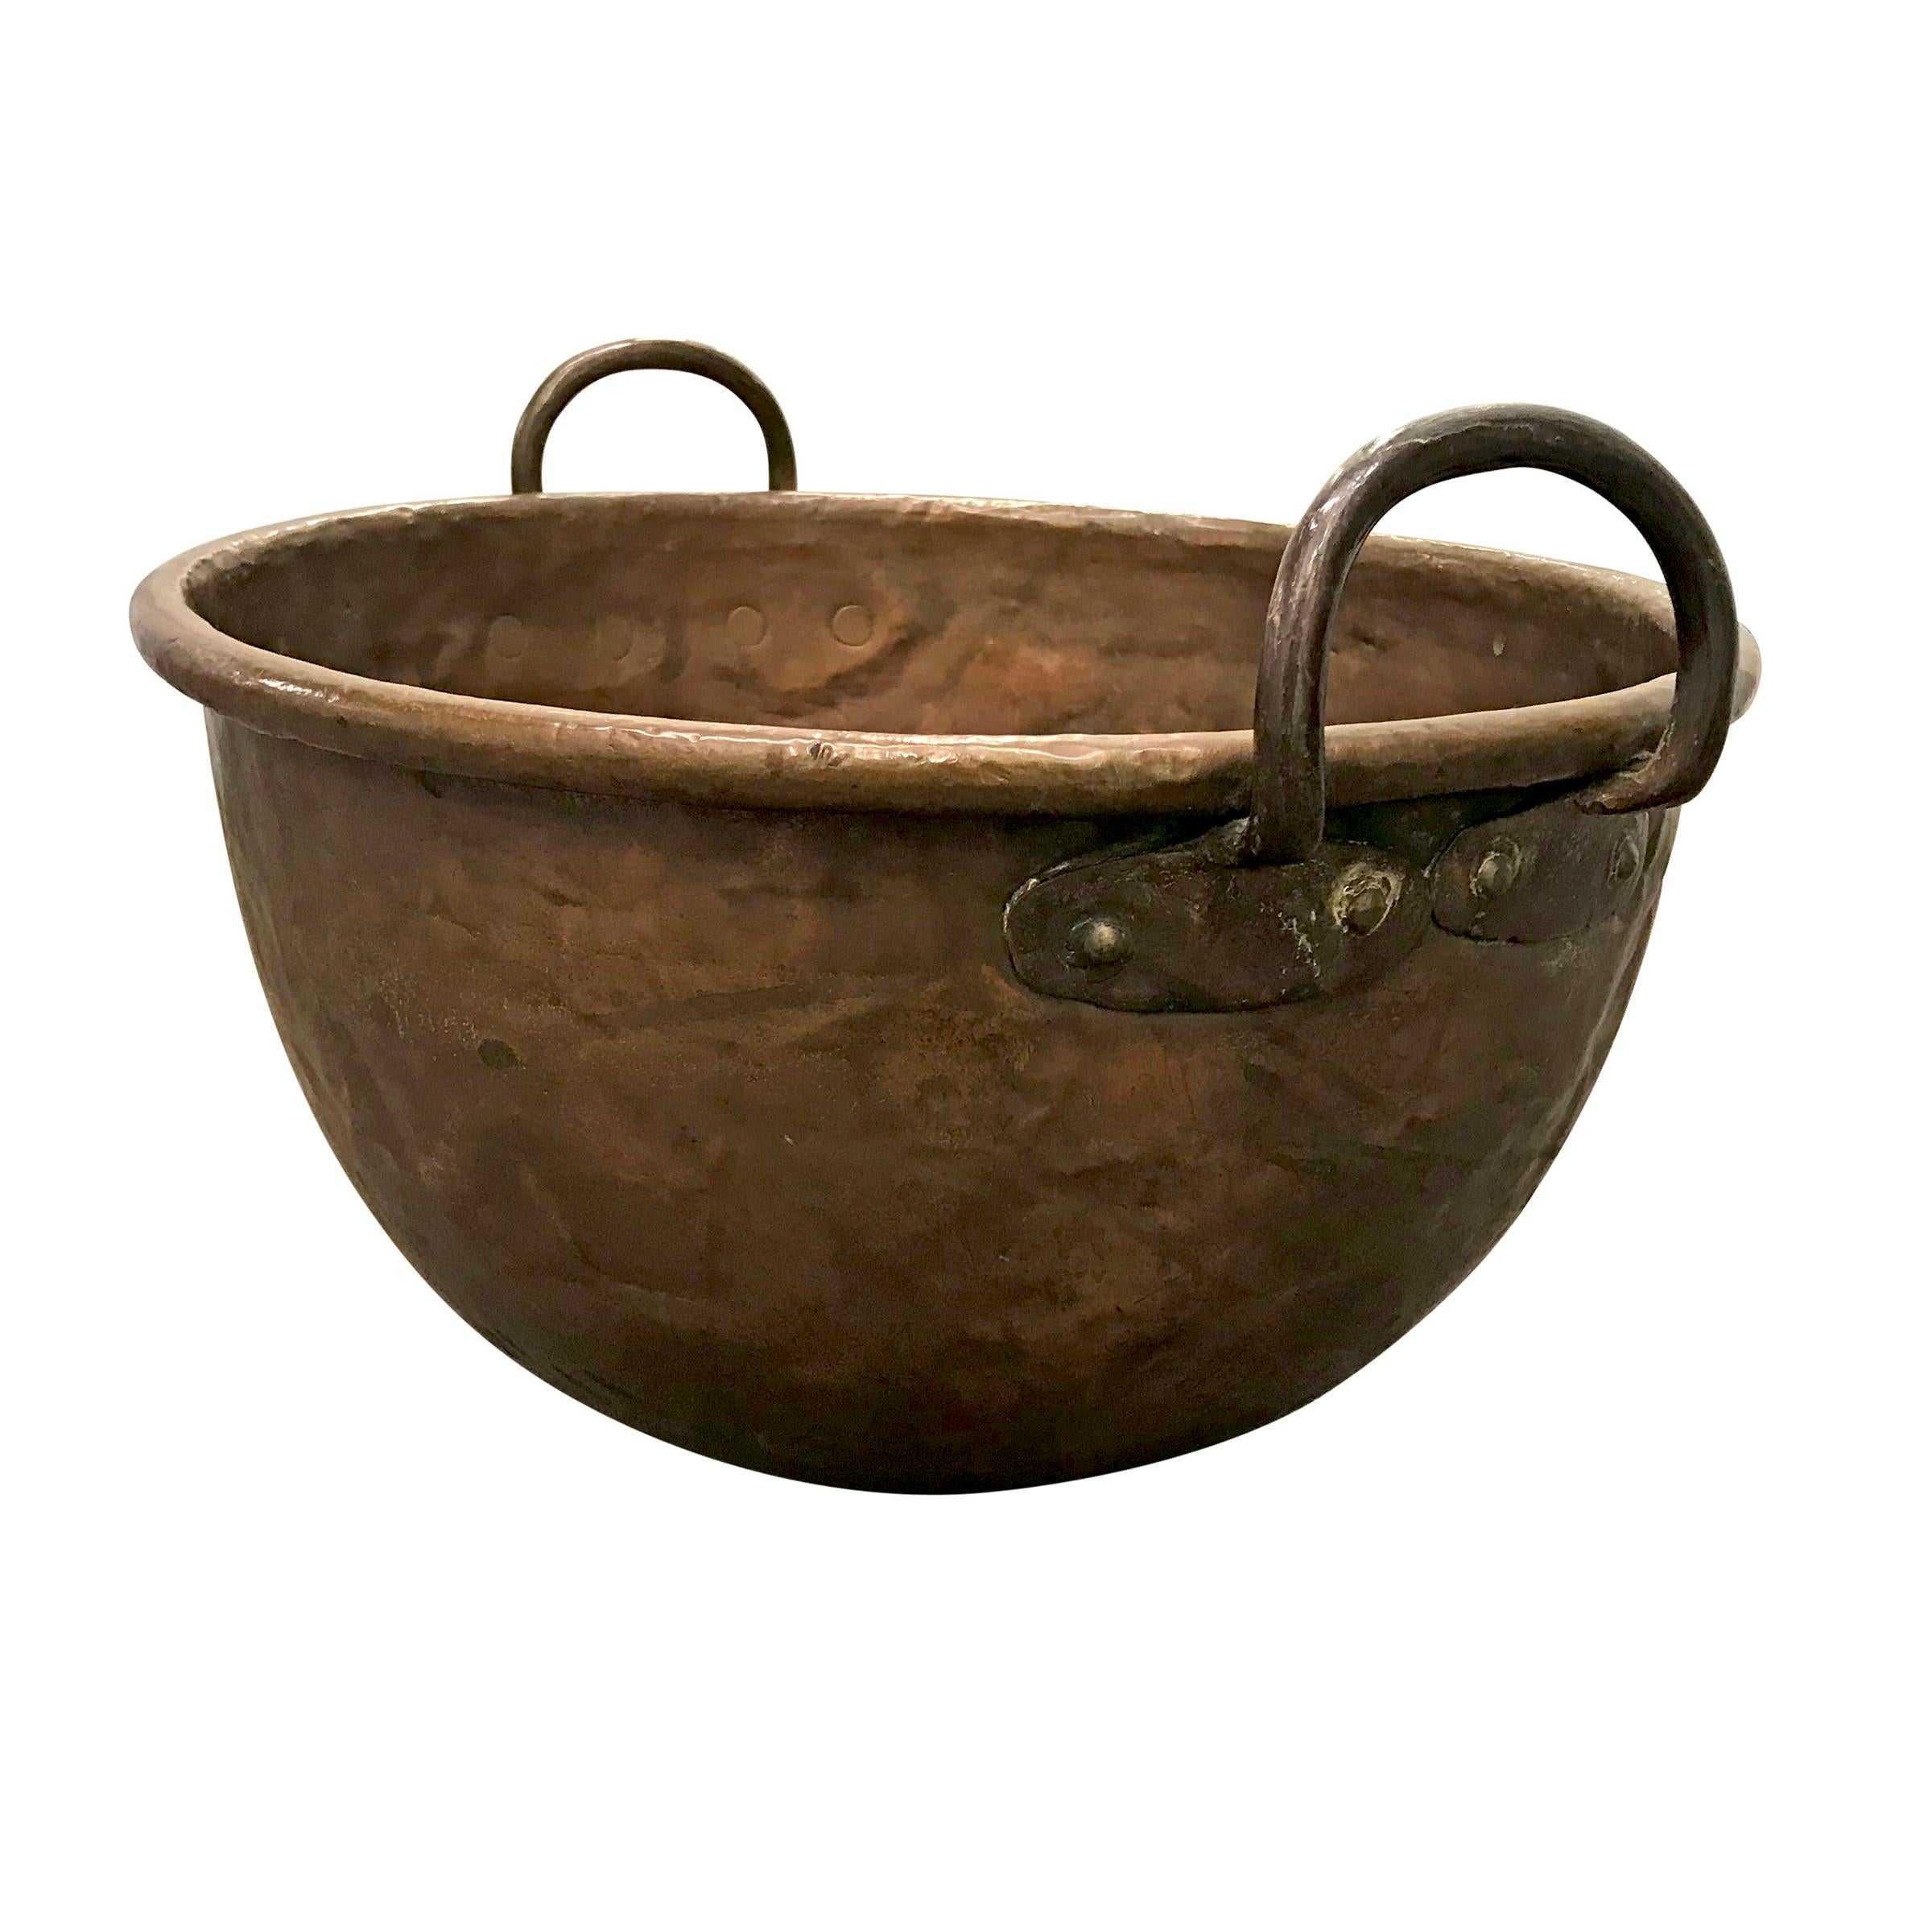 An 18th century French copper confectioner's pot with wonderfully forged handles, a thick rolled rim, and a circular patch at the bottom with the most elaborate hand-hammered rivets. We think this is great as is, or it could be turned into a sweet